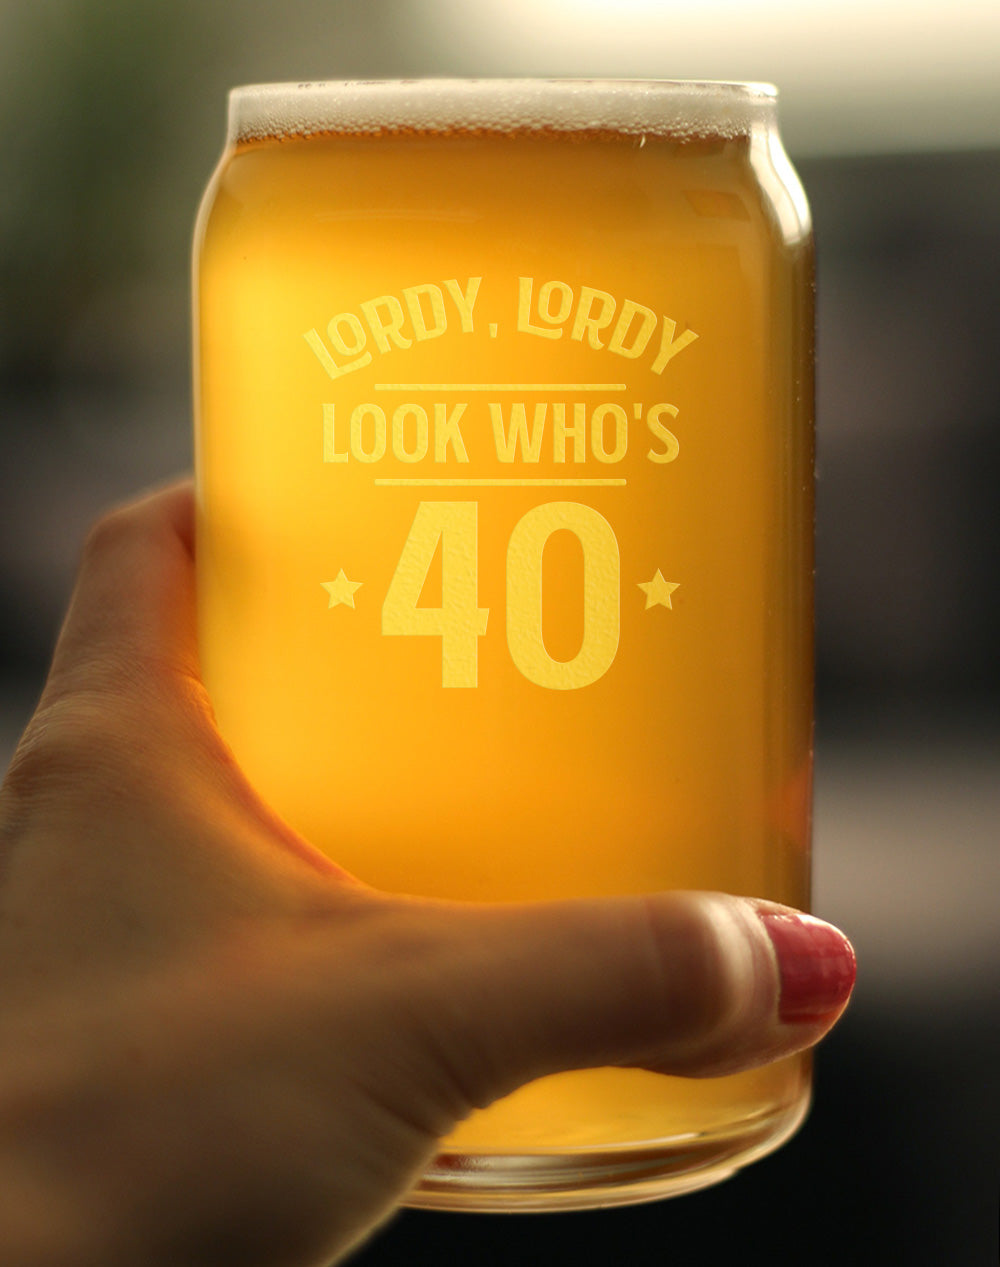 Lordy Lordy Look Who&#39;s 40 - 16 Ounce Beer Can Pint Glass